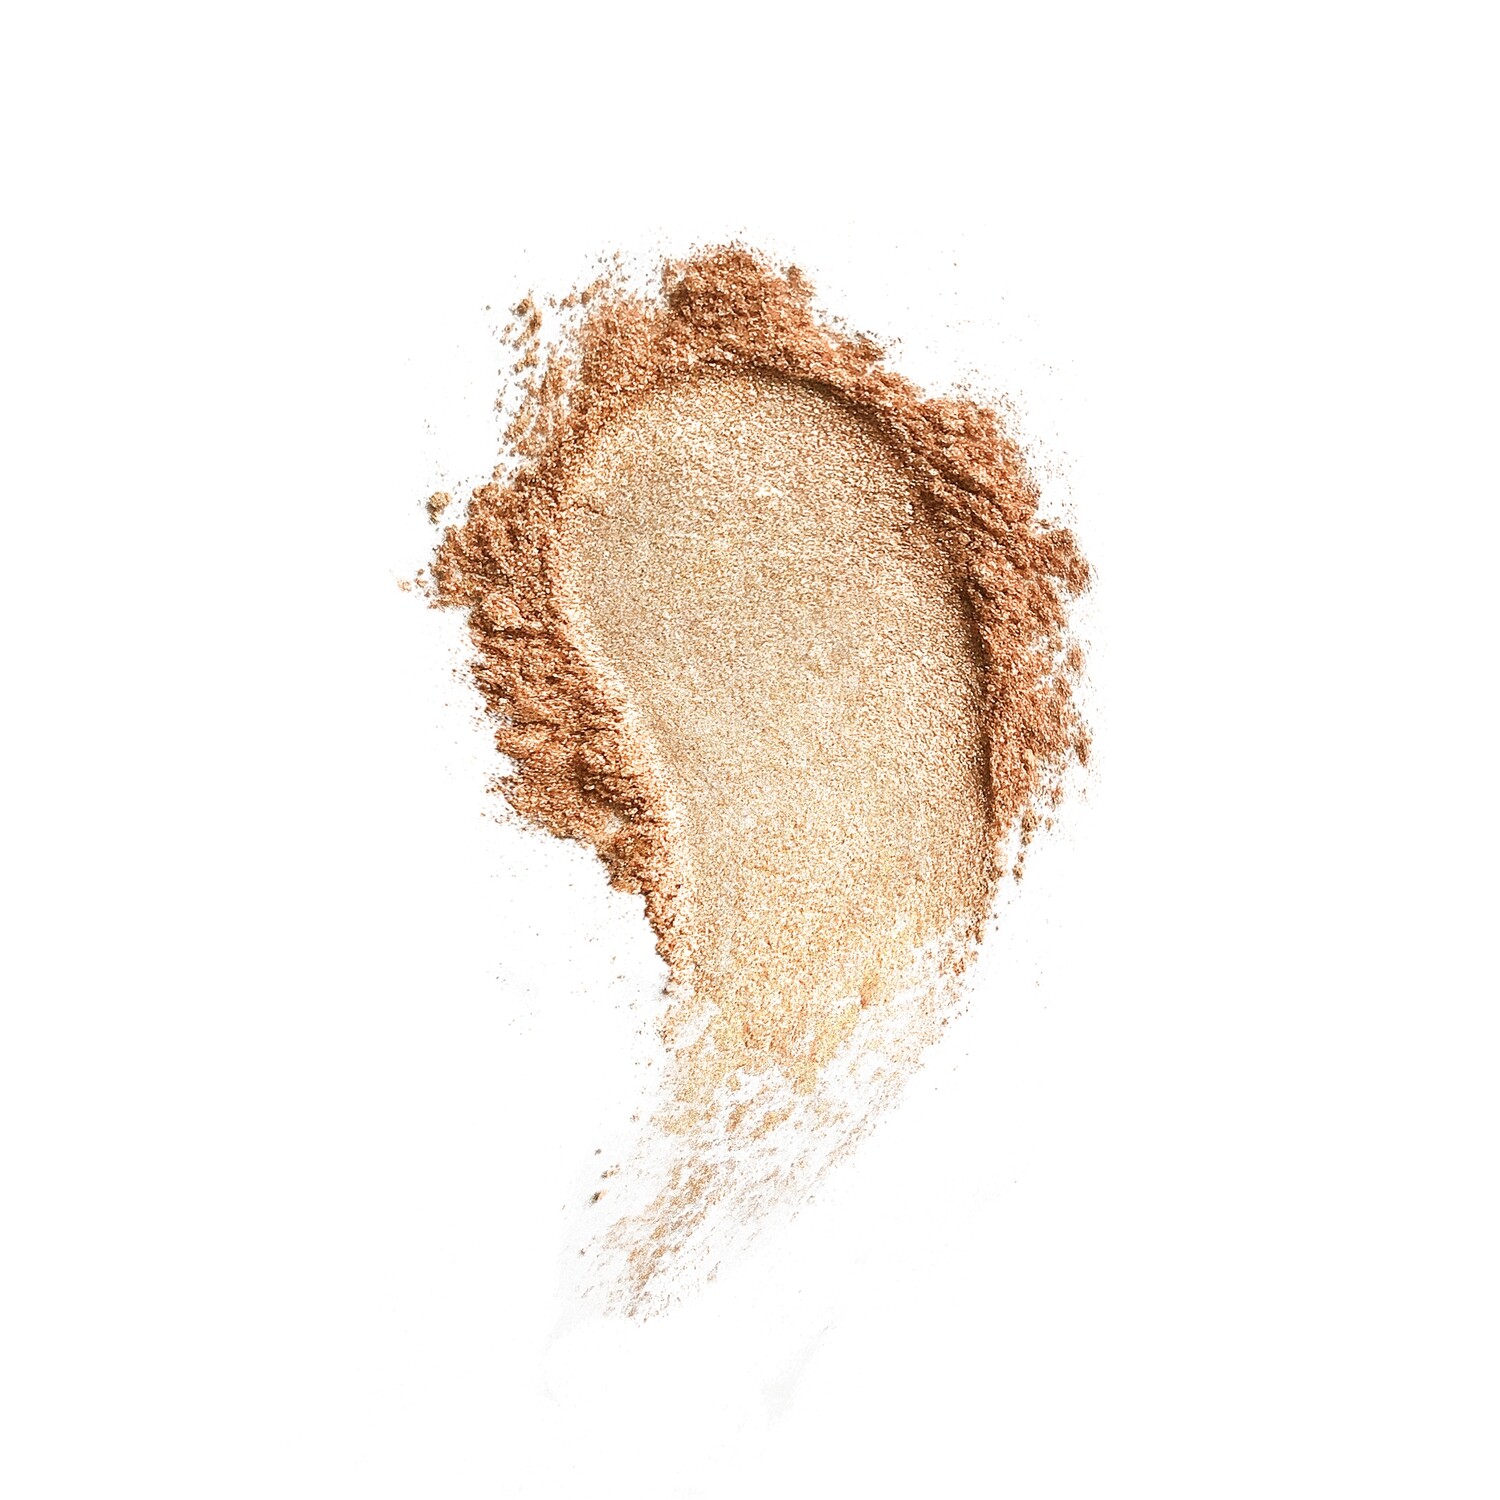 PAESE MINERALS MINERAL HIGHLIGHTER